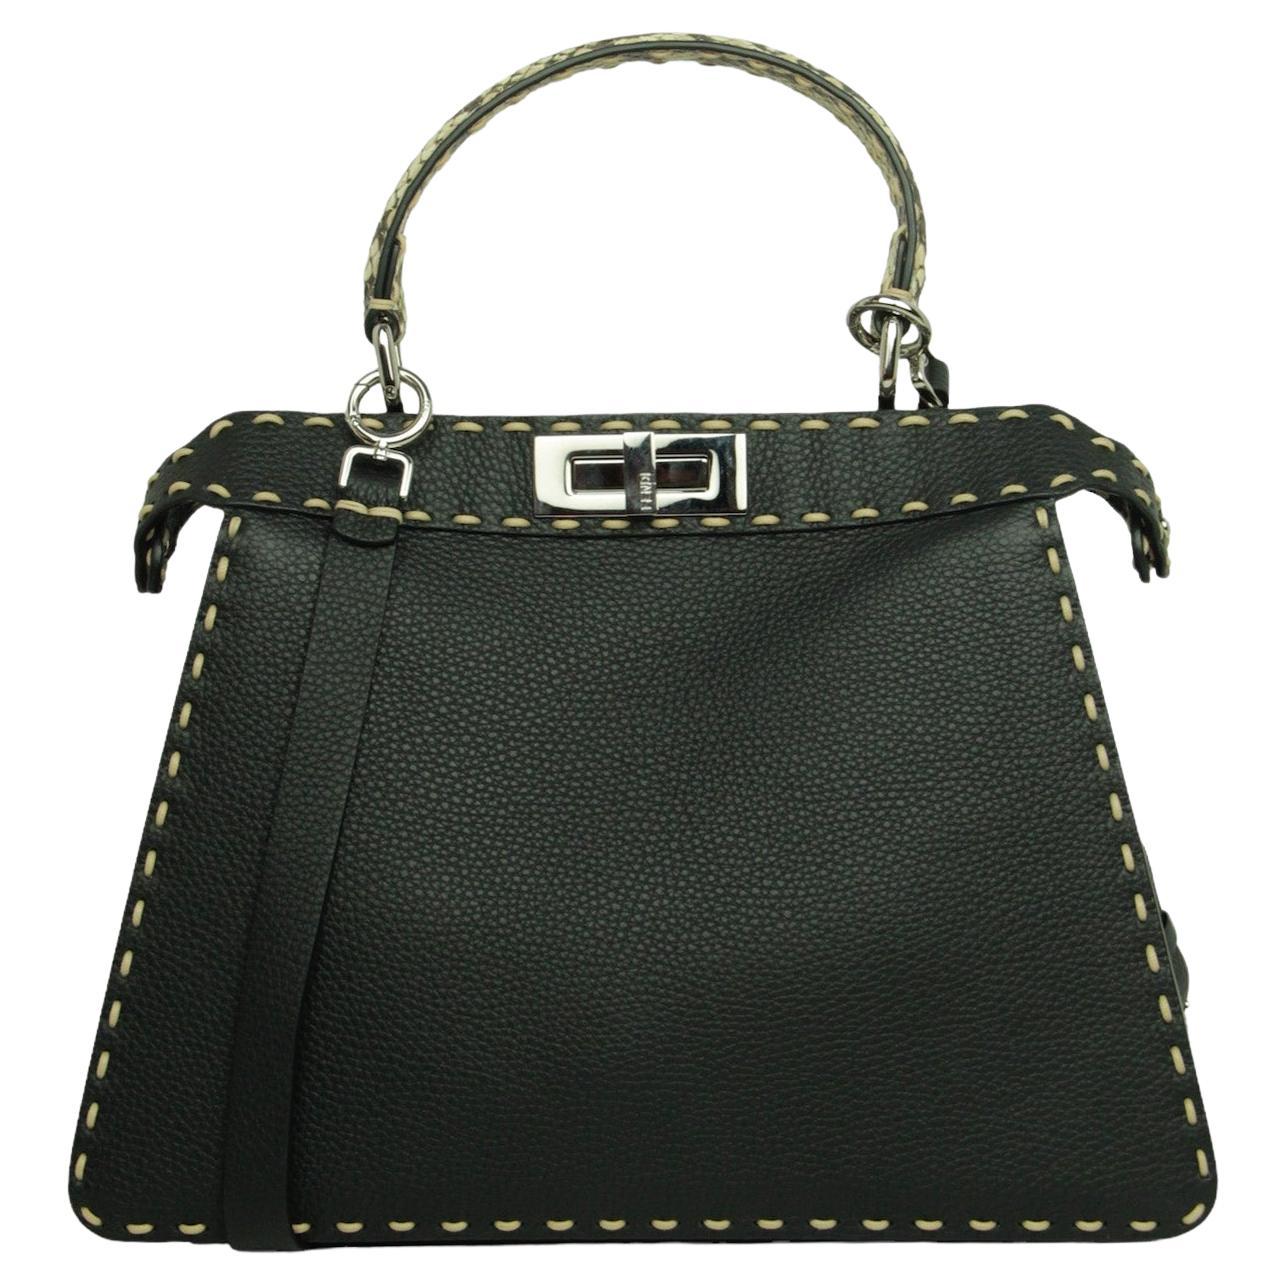 Do all Fendi bags have a serial number?